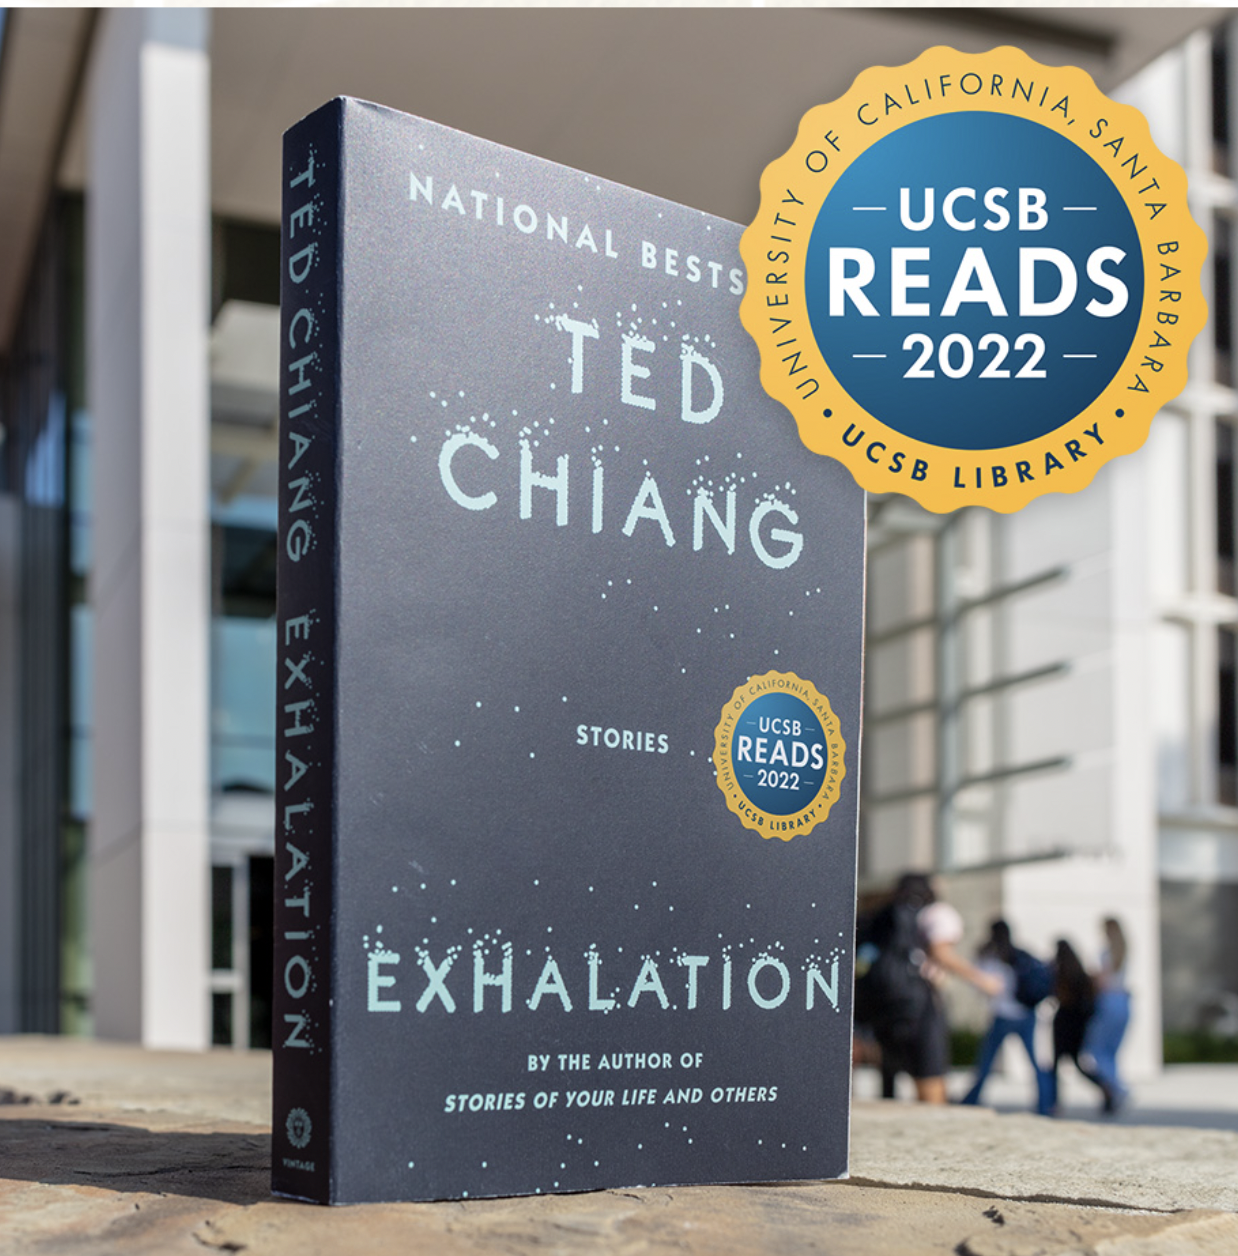 Ted Chiang: Realist of a Larger Reality - Public Books